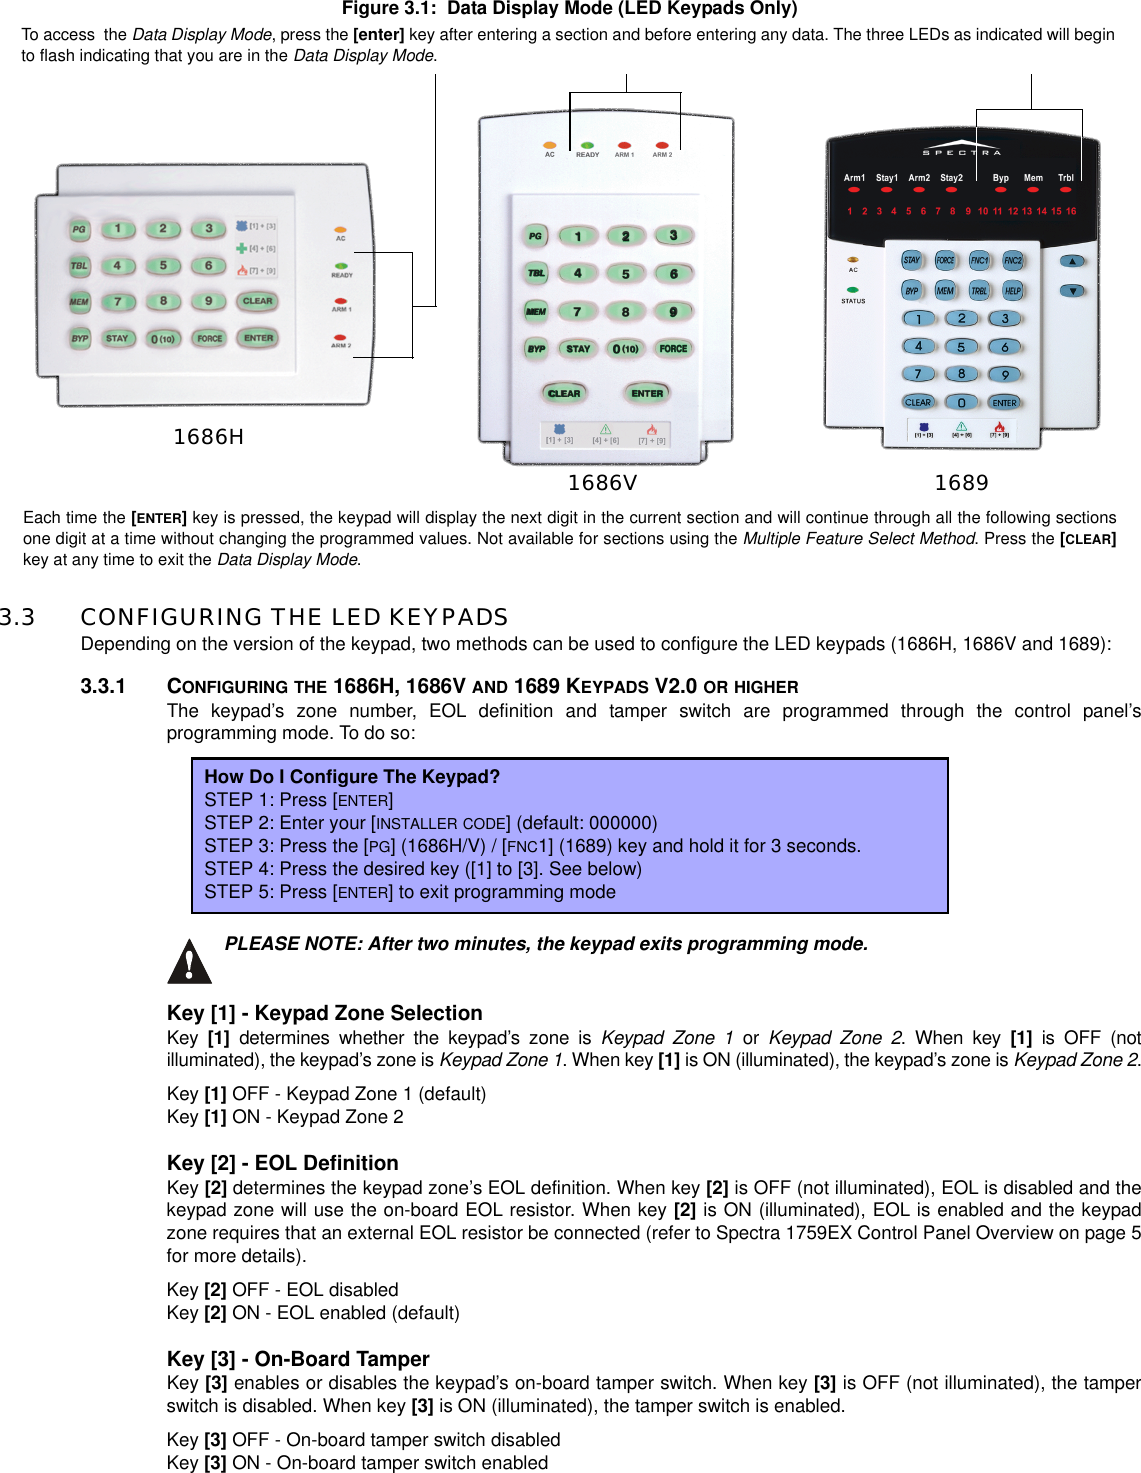 Figure 3.1: Data Display Mode (LED Keypads Only)3.3 CONFIGURING THE LED KEYPADSDepending on the version of the keypad, two methods can be used to configure the LED keypads (1686H, 1686V and 1689):3.3.1 CONFIGURING THE 1686H, 1686V AND 1689 KEYPADS V2.0 OR HIGHERThe keypad’s zone number, EOL definition and tamper switch are programmed through the control panel’sprogramming mode. To do so:PLEASE NOTE: After two minutes, the keypad exits programming mode.Key [1] - Keypad Zone SelectionKey [1] determines whether the keypad’s zone is Keypad Zone 1 or Keypad Zone 2. When key [1] is OFF (notilluminated), the keypad’s zone is Keypad Zone 1. When key [1] is ON (illuminated), the keypad’s zone is Keypad Zone 2.Key [1] OFF - Keypad Zone 1 (default)Key [1] ON - Keypad Zone 2Key [2] - EOL DefinitionKey [2] determines the keypad zone’s EOL definition. When key [2] is OFF (not illuminated), EOL is disabled and thekeypad zone will use the on-board EOL resistor. When key [2] is ON (illuminated), EOL is enabled and the keypadzone requires that an external EOL resistor be connected (refer to Spectra 1759EX Control Panel Overview on page 5for more details).Key [2] OFF - EOL disabledKey [2] ON - EOL enabled (default)Key [3] - On-Board TamperKey [3] enables or disables the keypad’s on-board tamper switch. When key [3] is OFF (not illuminated), the tamperswitch is disabled. When key [3] is ON (illuminated), the tamper switch is enabled.Key [3] OFF - On-board tamper switch disabledKey [3] ON - On-board tamper switch enabledHow Do I Configure The Keypad?STEP 1: Press [ENTER]STEP 2: Enter your [INSTALLER CODE] (default: 000000)STEP 3: Press the [PG] (1686H/V) / [FNC1] (1689) key and hold it for 3 seconds.STEP 4: Press the desired key ([1] to [3]. See below)STEP 5: Press [ENTER] to exit programming modeTo access the Data Display Mode, press the [enter] key after entering a section and before entering any data. The three LEDs as indicated will beginto flash indicating that you are in the Data Display Mode.Each time the [ENTER]key is pressed, the keypad will display the next digit in the current section and will continue through all the following sectionsone digit at a time without changing the programmed values. Not available for sections using the Multiple Feature Select Method. Press the [CLEAR]key at any time to exit the Data Display Mode.1686H1686V 1689